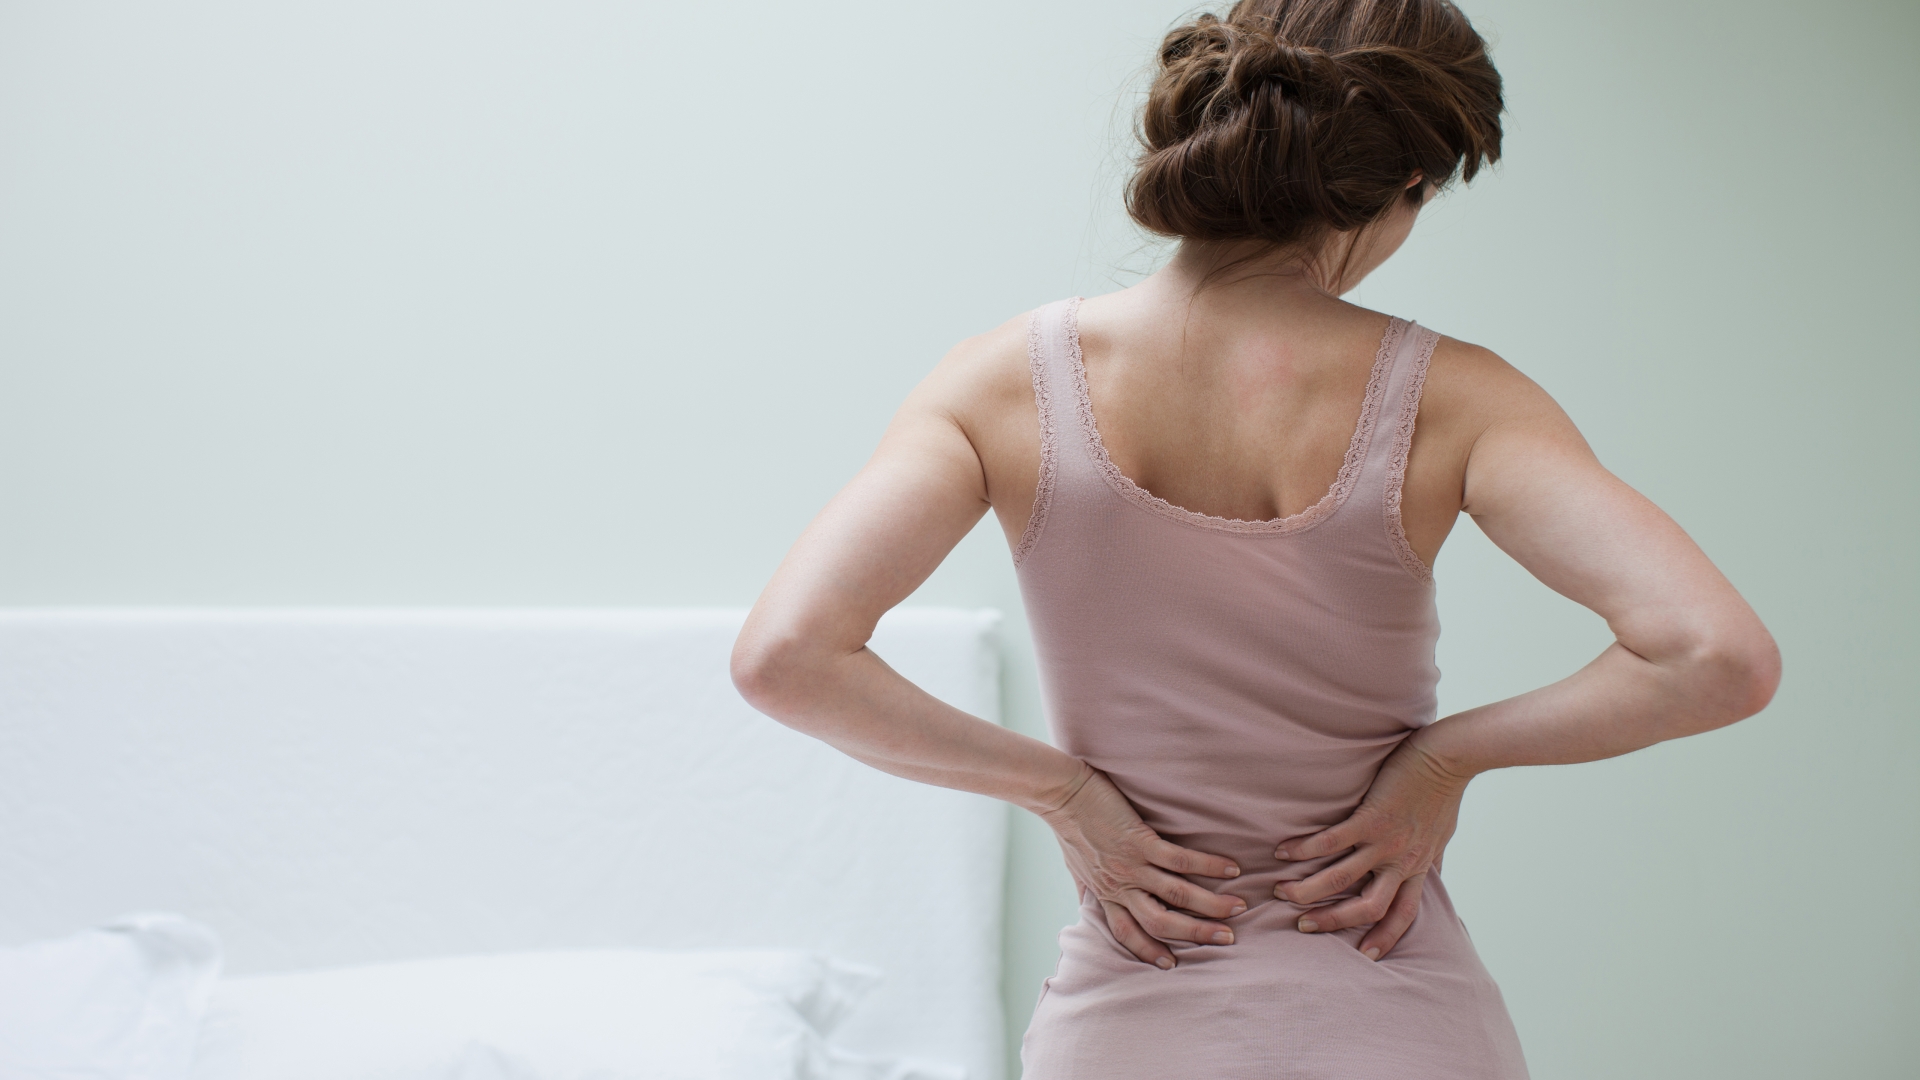 Here are four common positions that hurt your back.